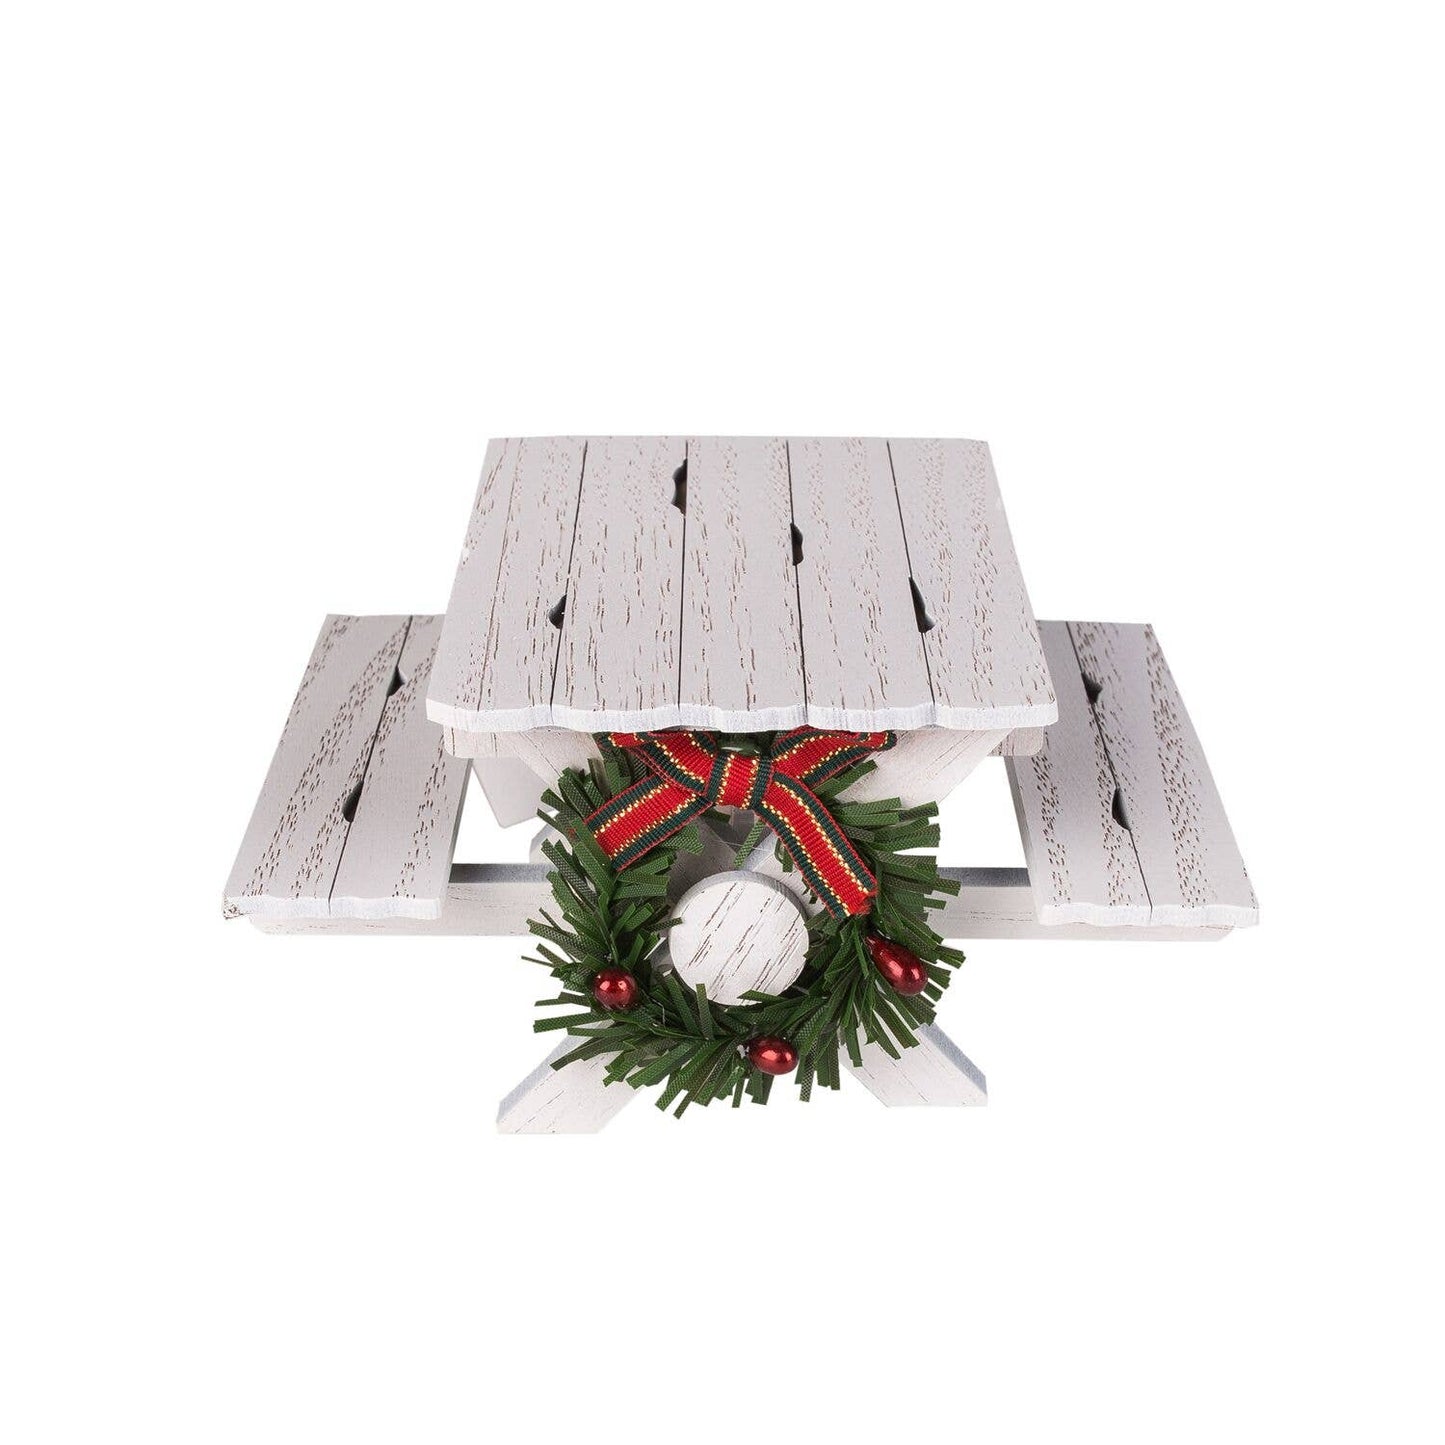 Christmas Picnic Table with Wreath, White 5.1 Inches